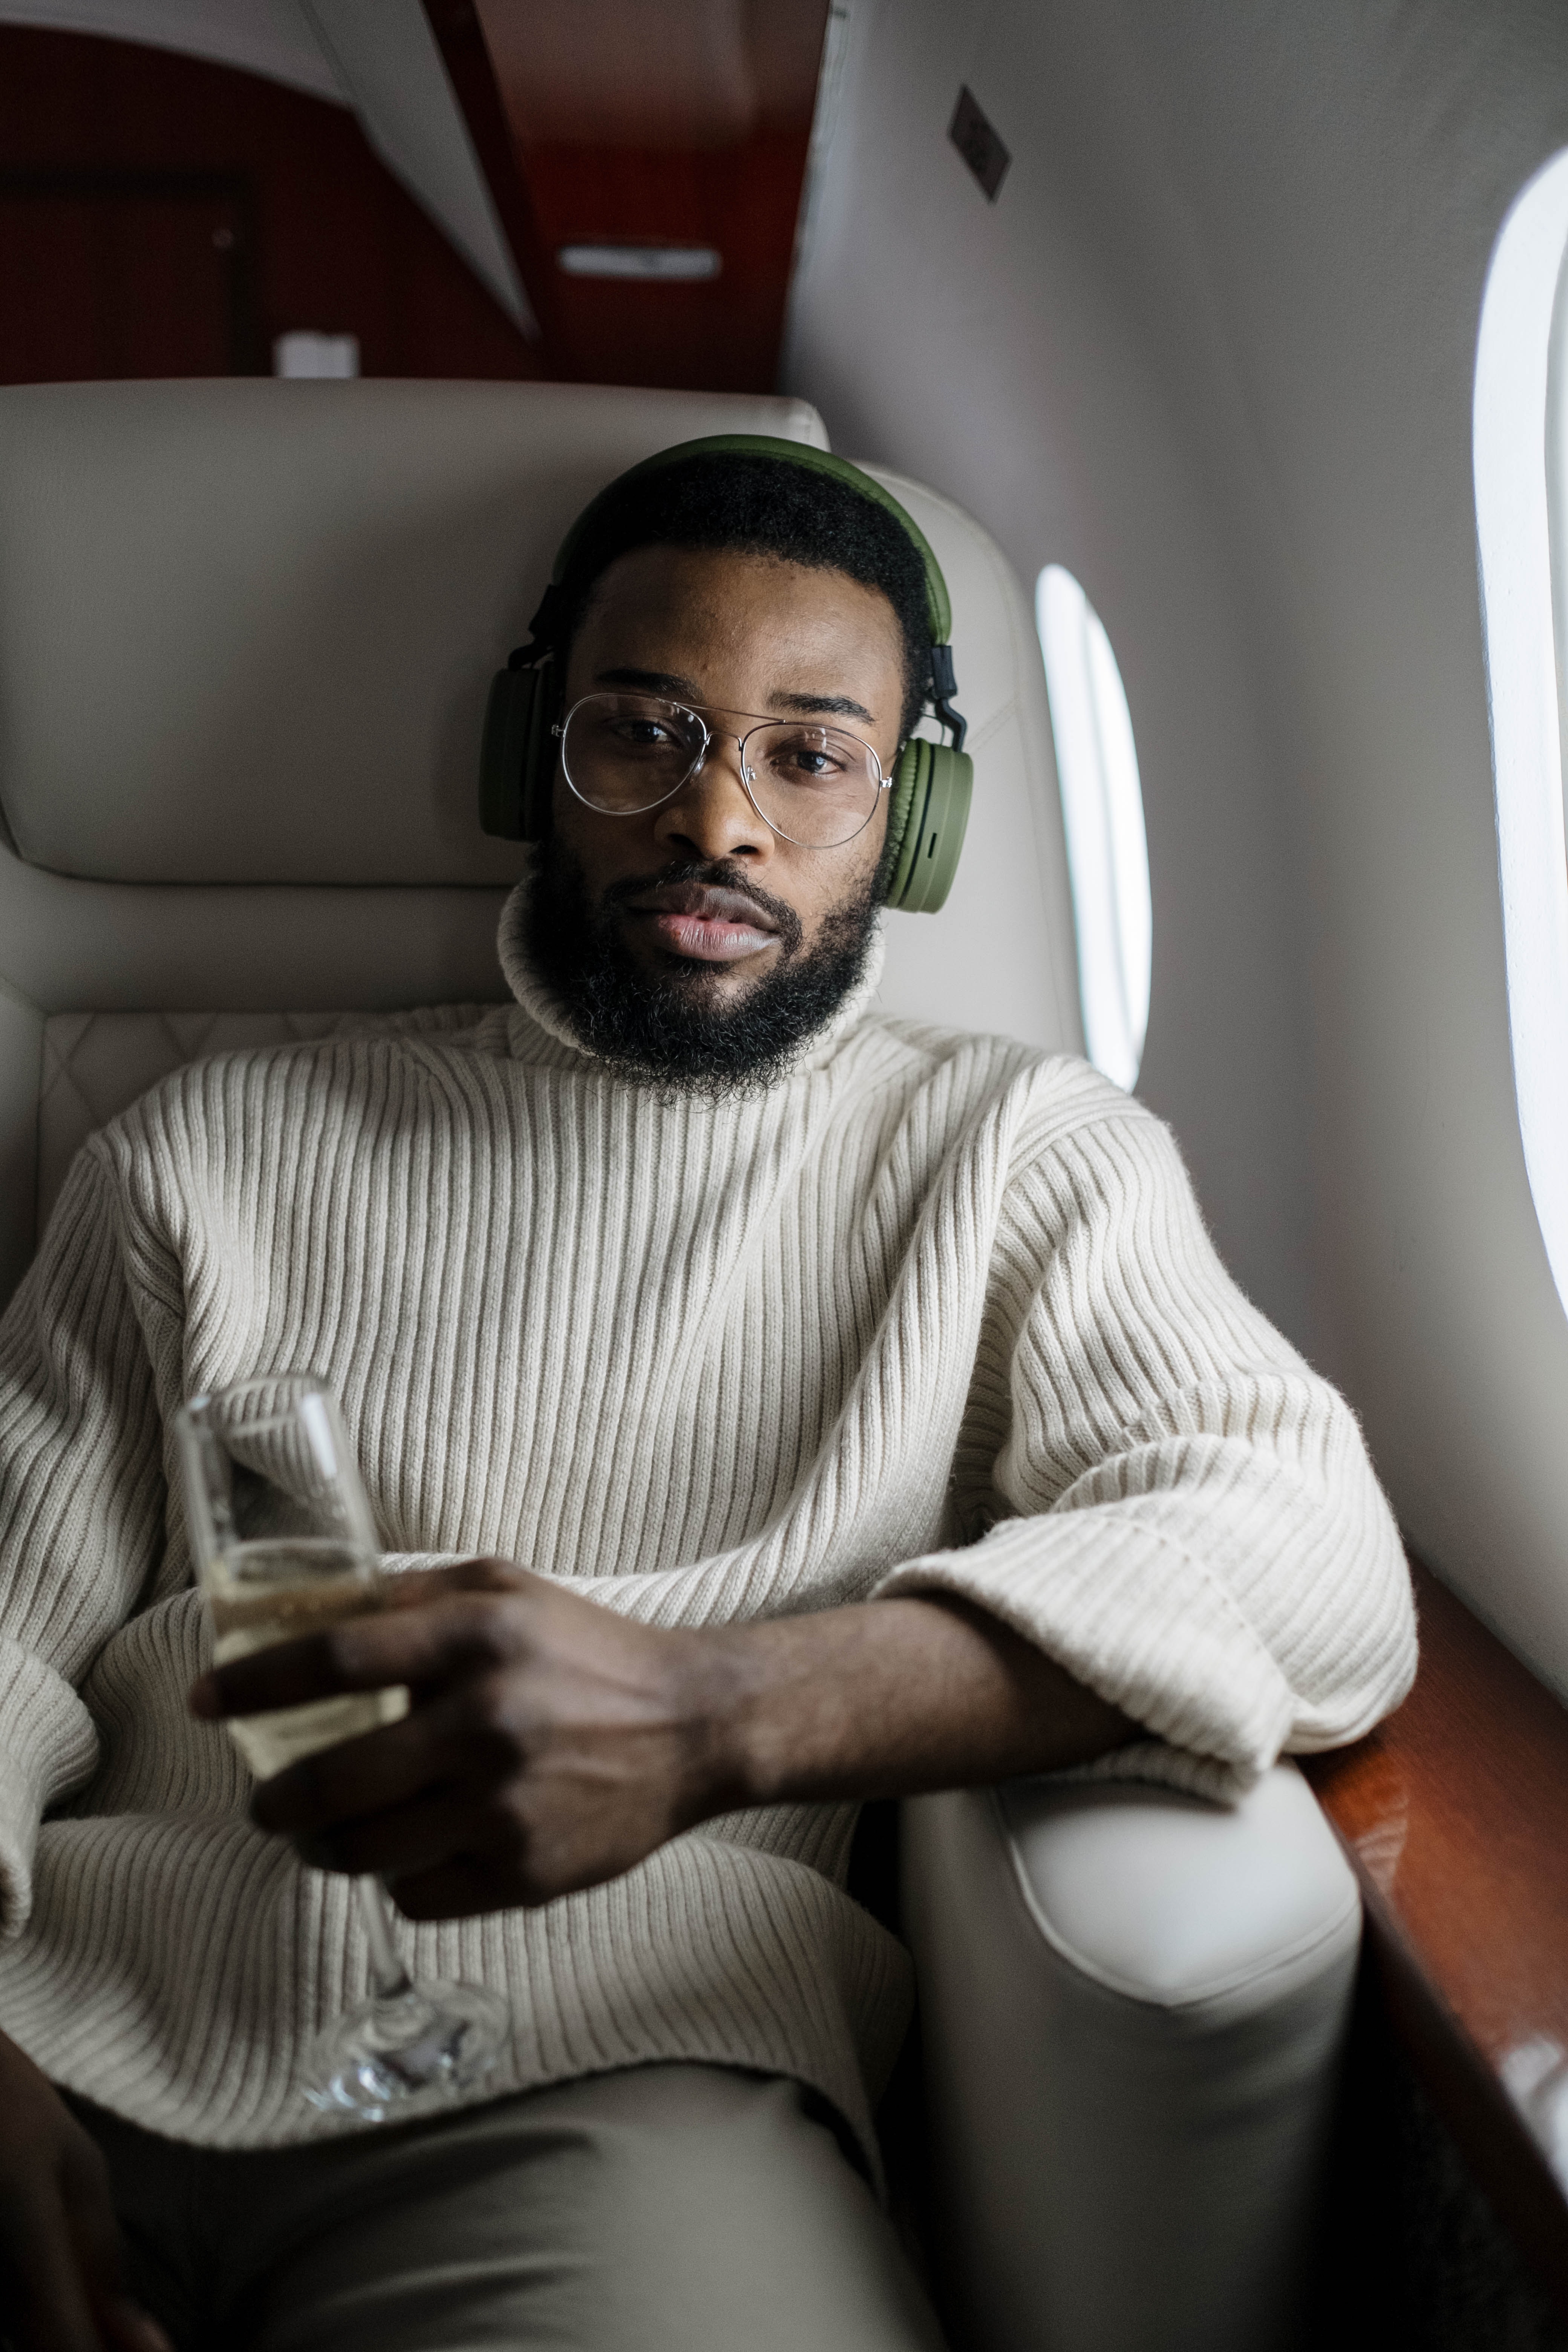 A man drinking on a plane | Source: Pexels